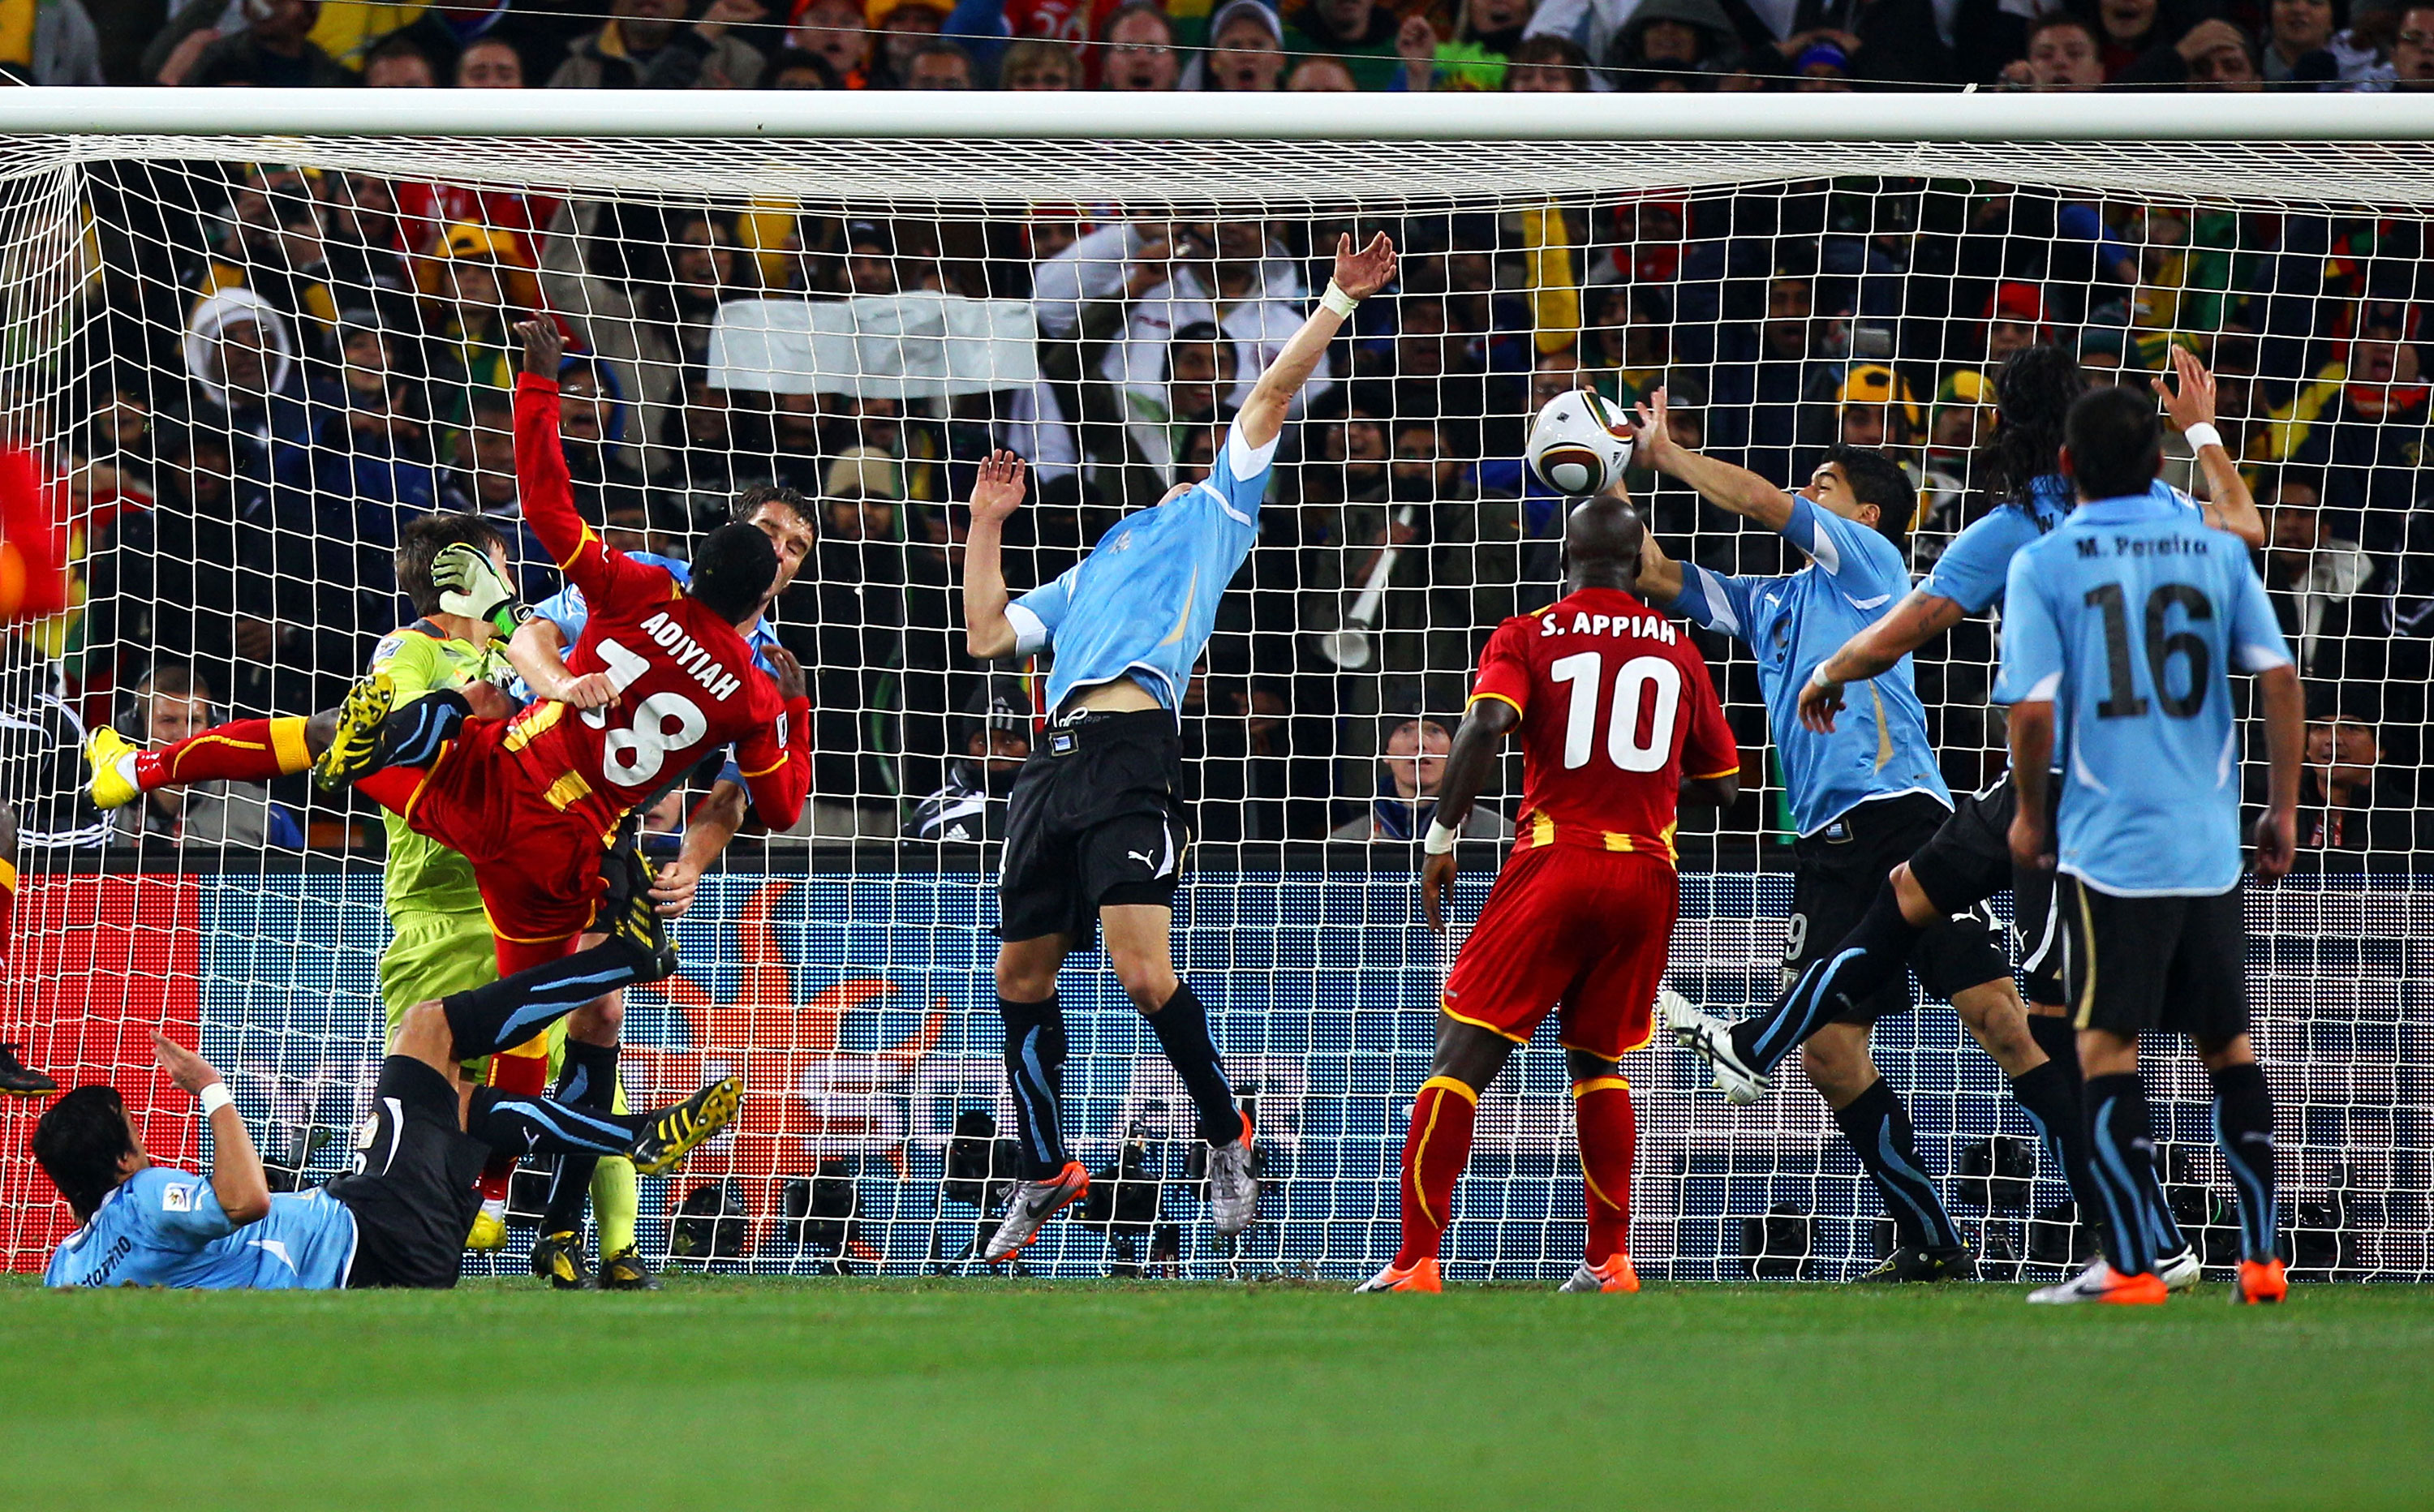 Luis Suarez of Uruguay handles the ball on the goal line during the 2010 World Cup match between Uruguay and Ghana.